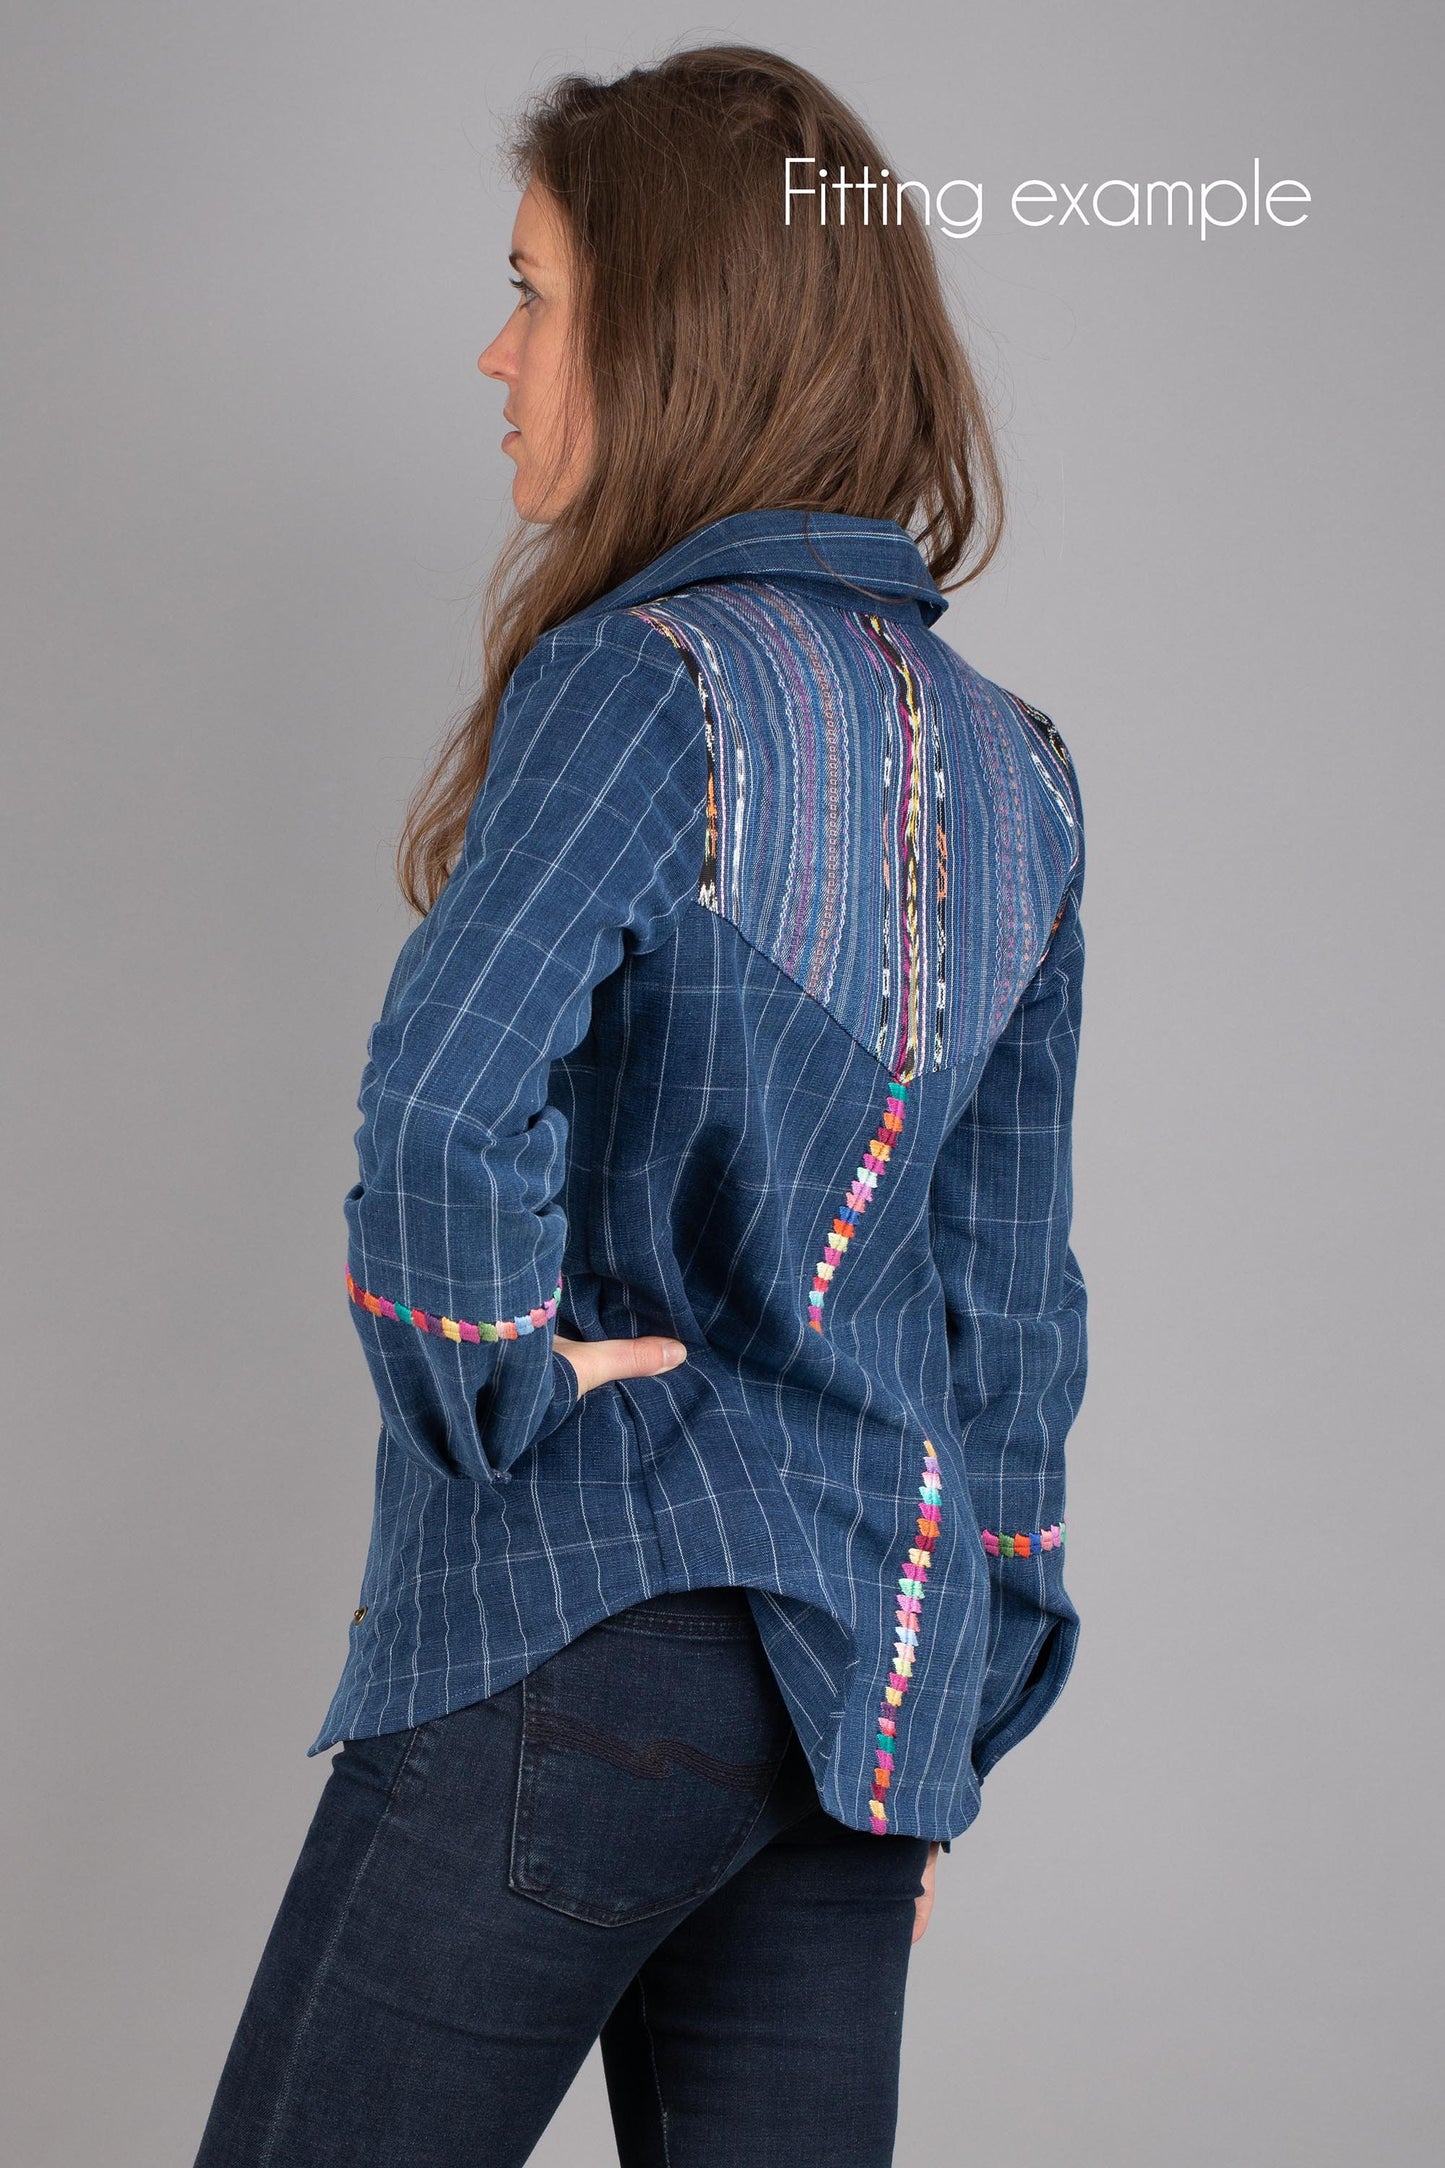 Denim Shirt Woman No.2, jeans shirt for women, unique piece made from hand-woven fabrics, fairly traded